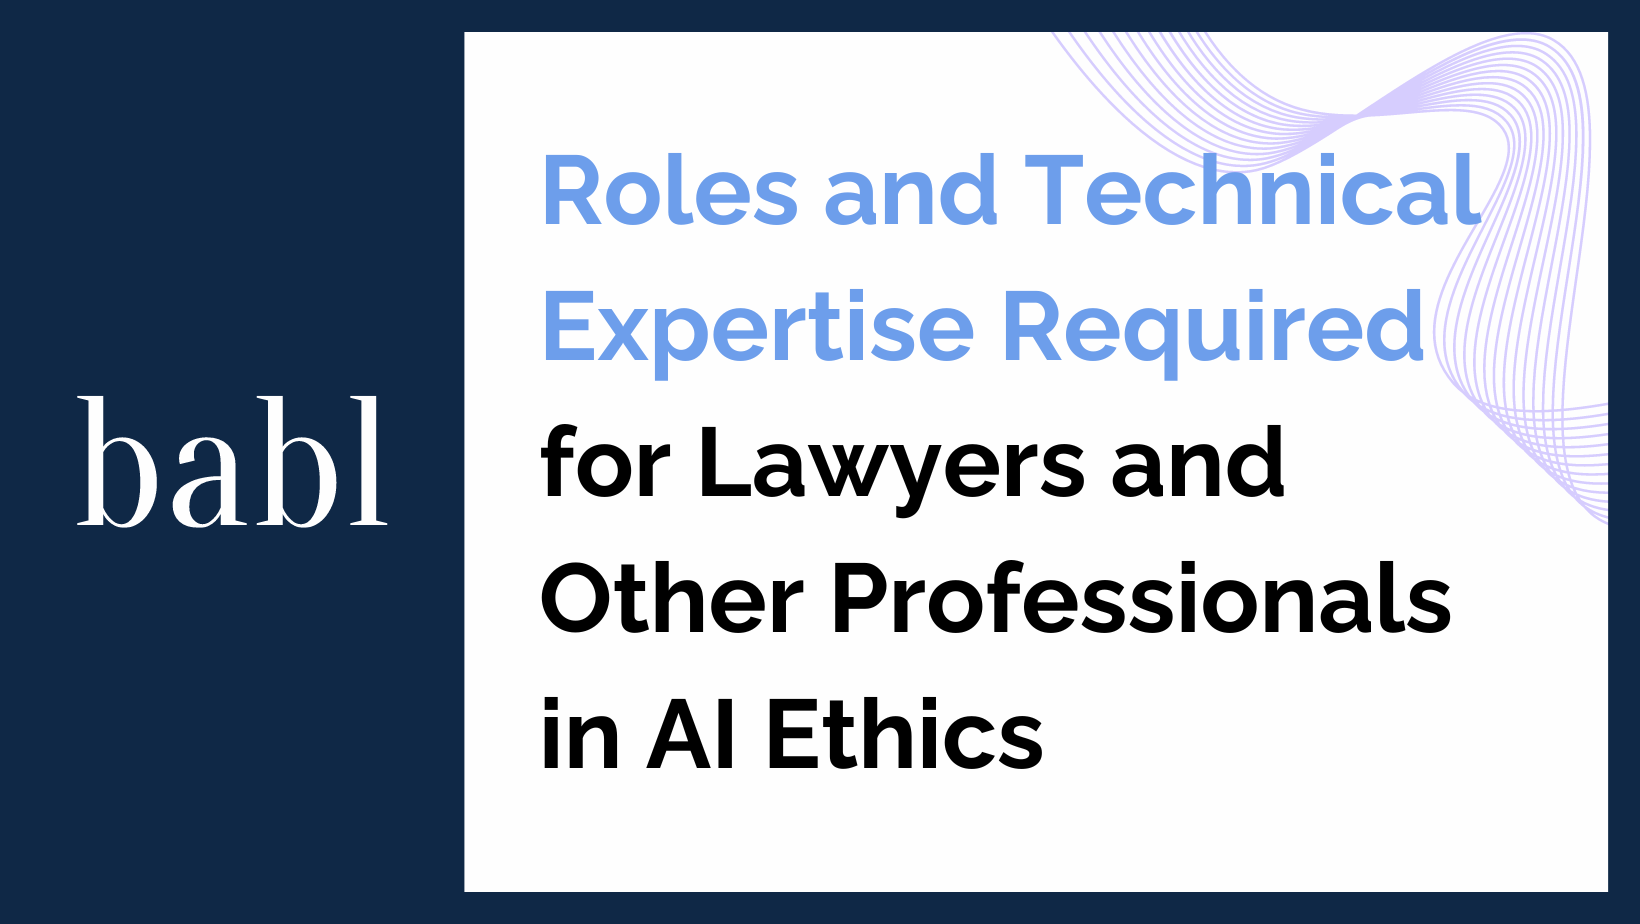 Roles and Technical Expertise Required for Lawyers and Other Professionals in AI Ethics